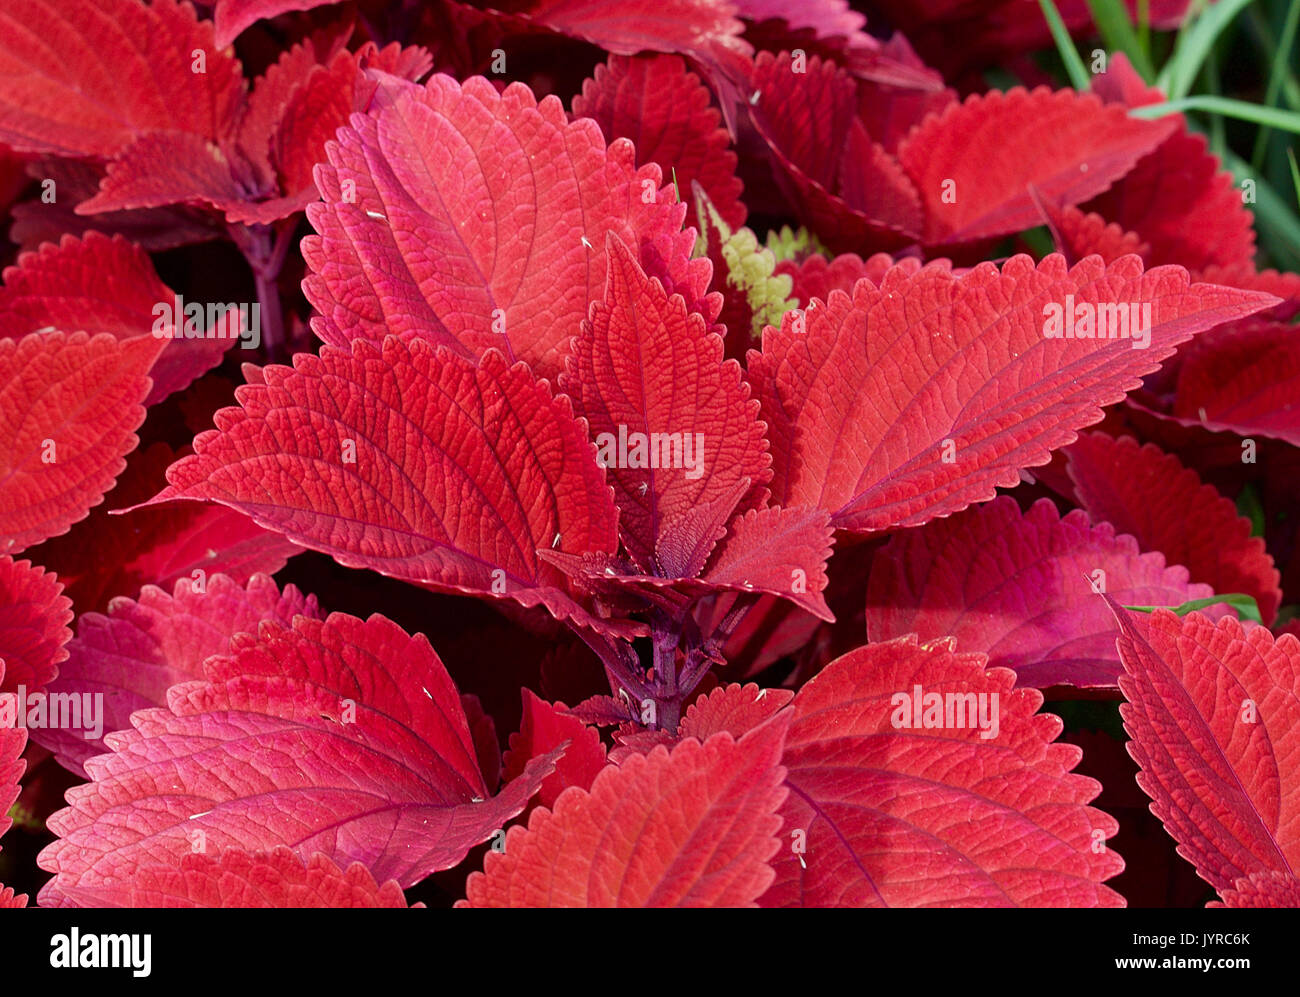 Red leafed house plant in an outdoor setting Stock Photo